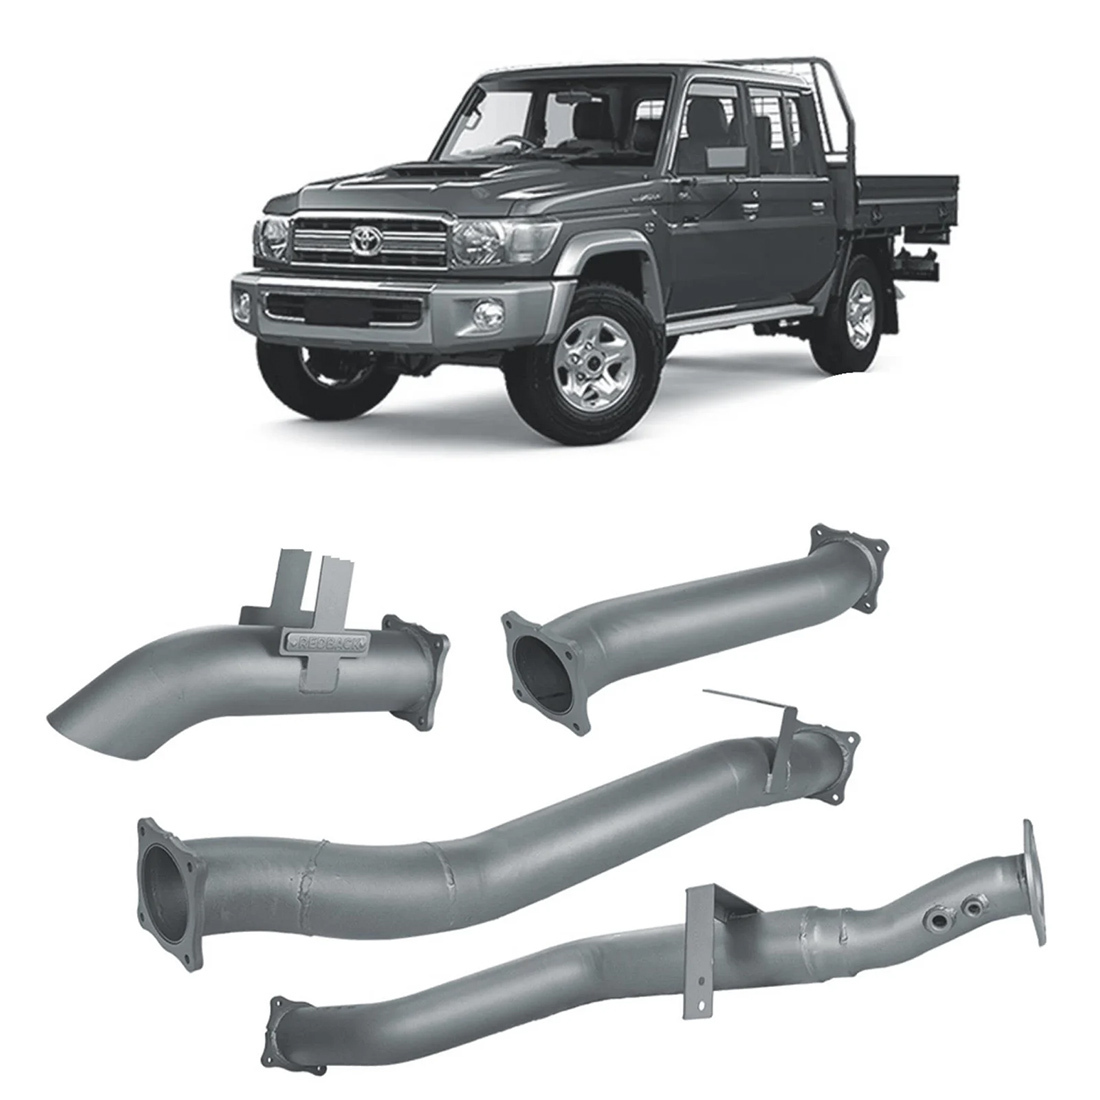 Redback Extreme Duty 4" DPF Back Exhaust with Muffler Delete for Toyota Landcruiser 79 Series Dual Cab image